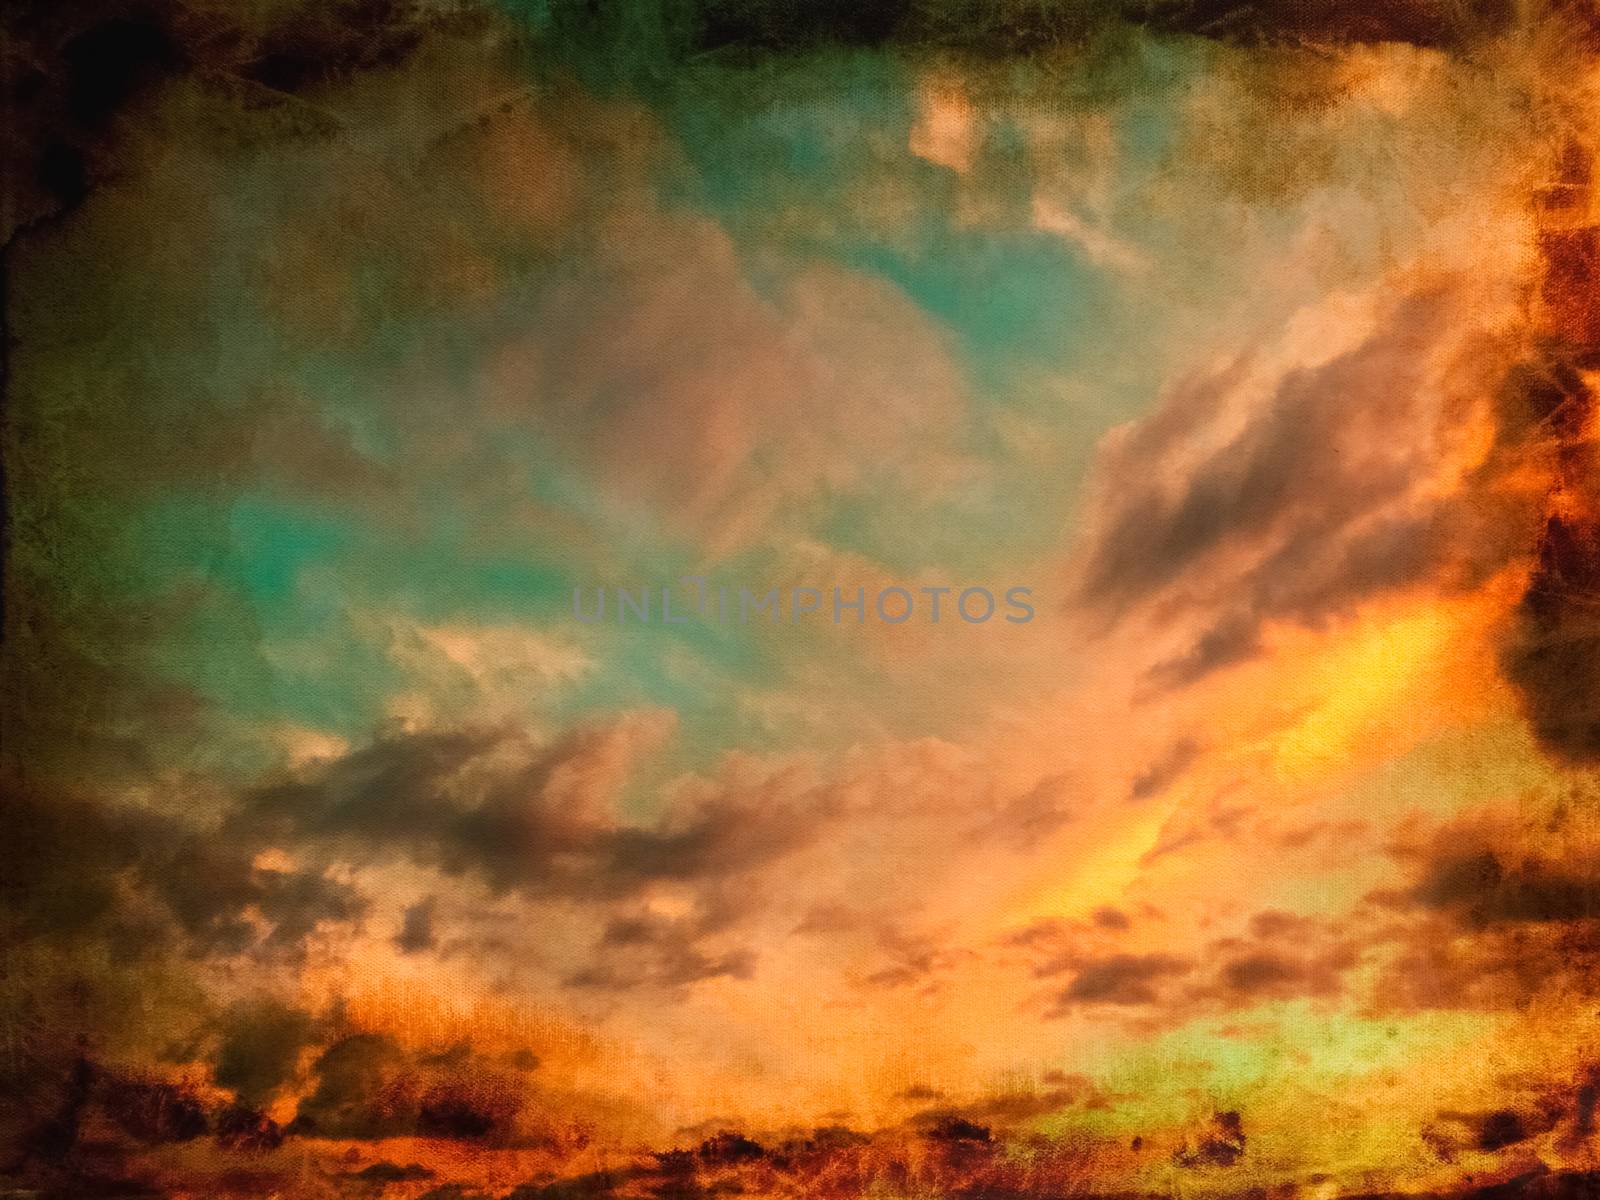 Vintage sunset sky and clouds background with burnt edges.